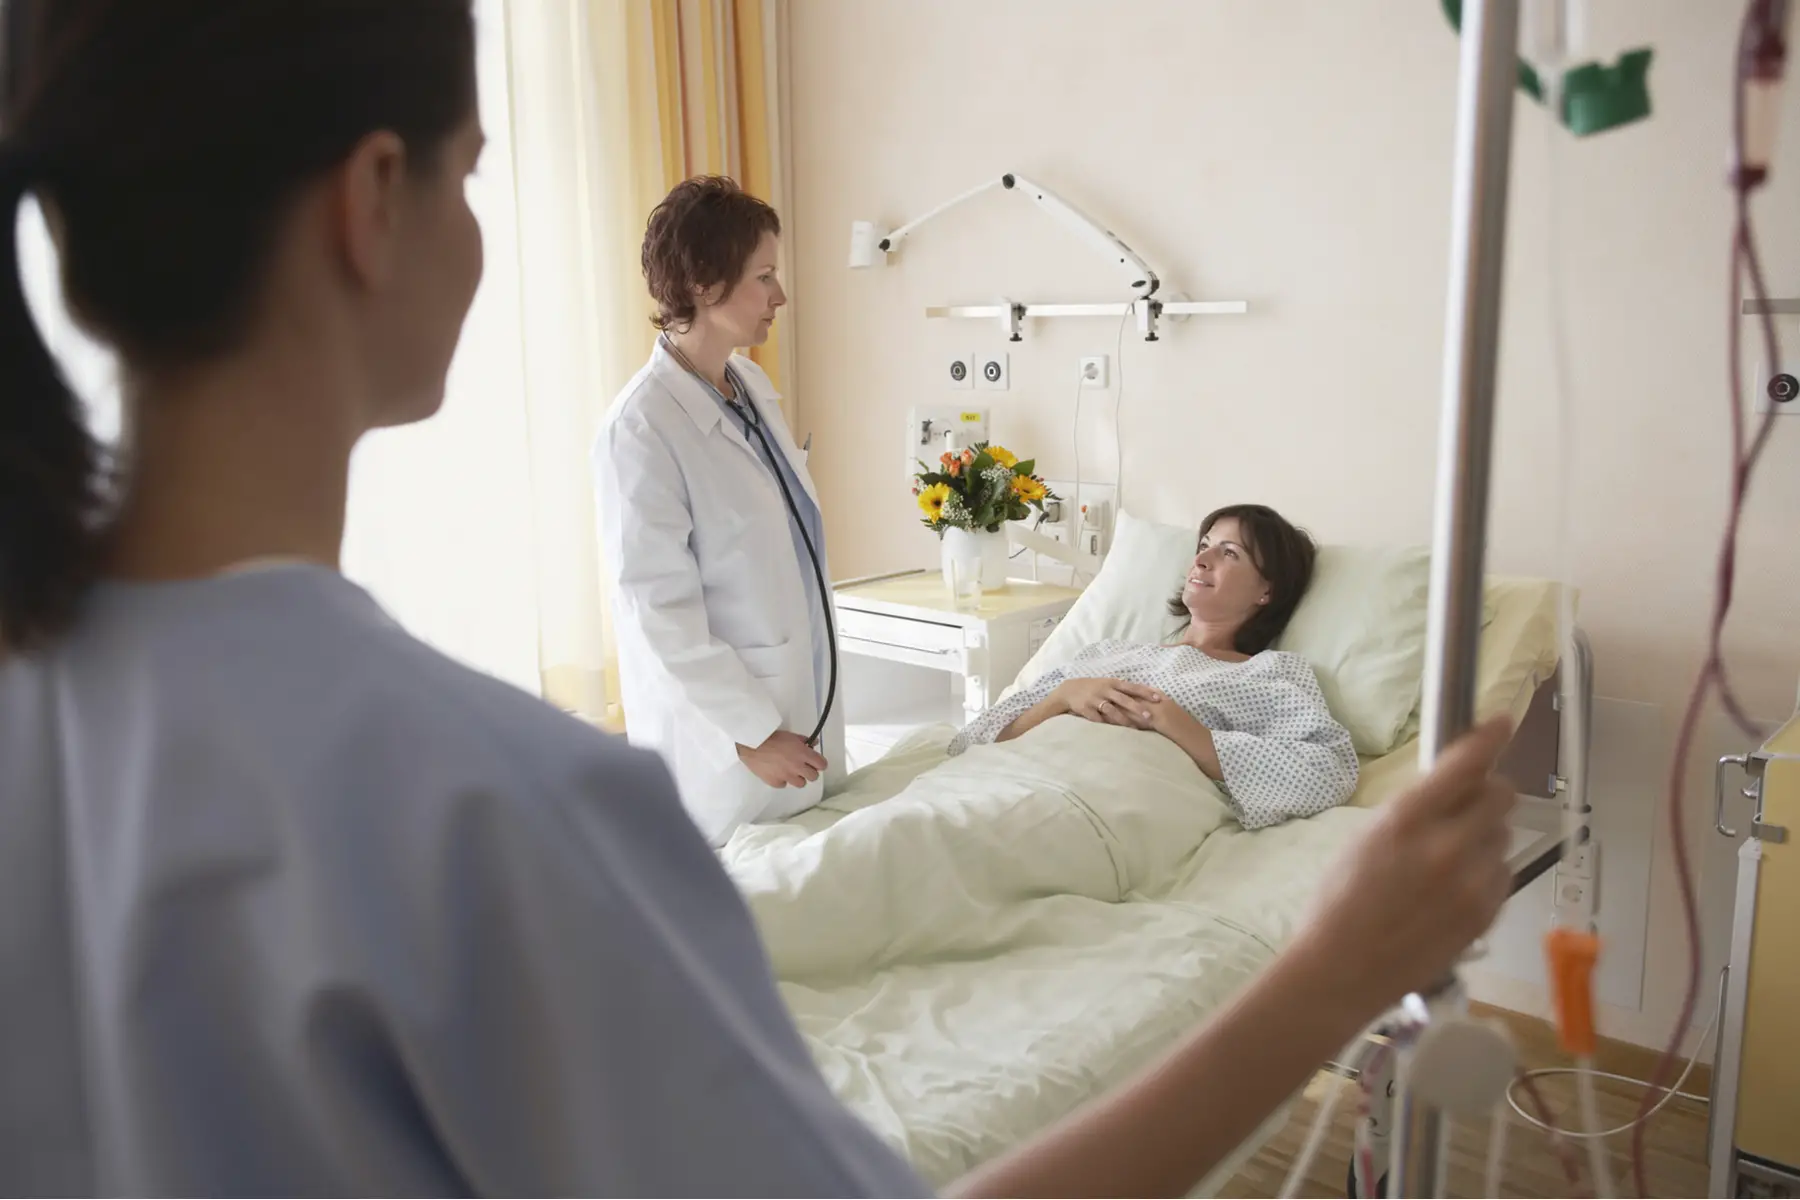 a patient chatting with a doctor and nurse in a private hospital room